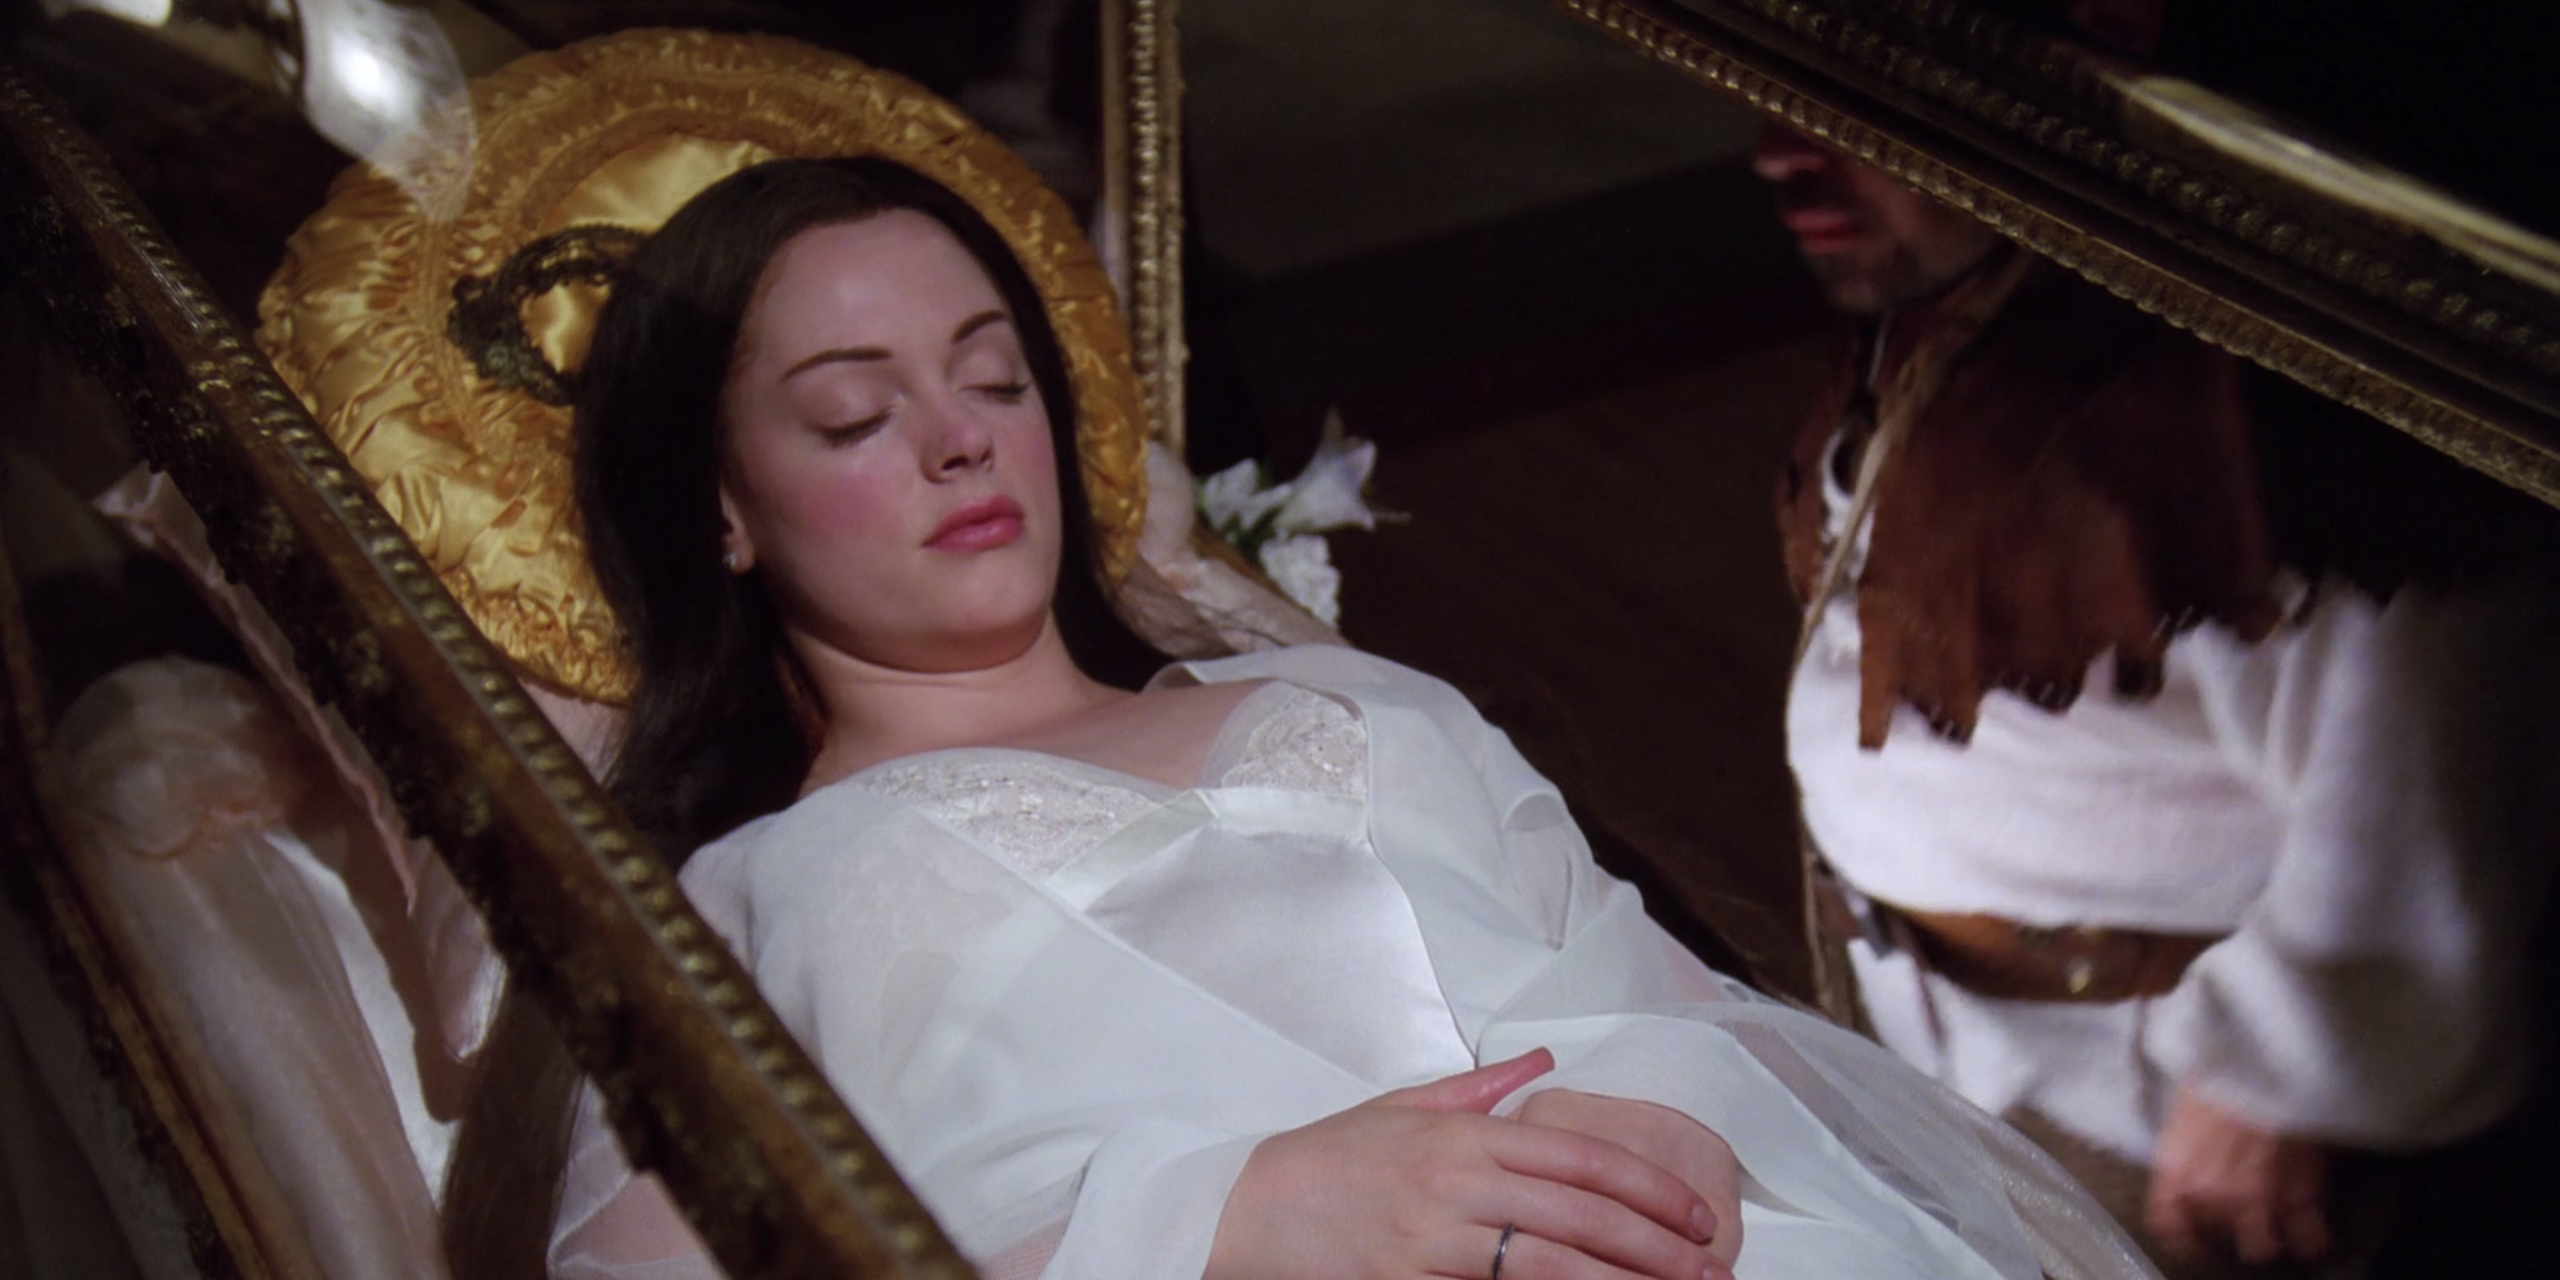 Paige in a glass coffin after eating Snow White's apple in Charmed